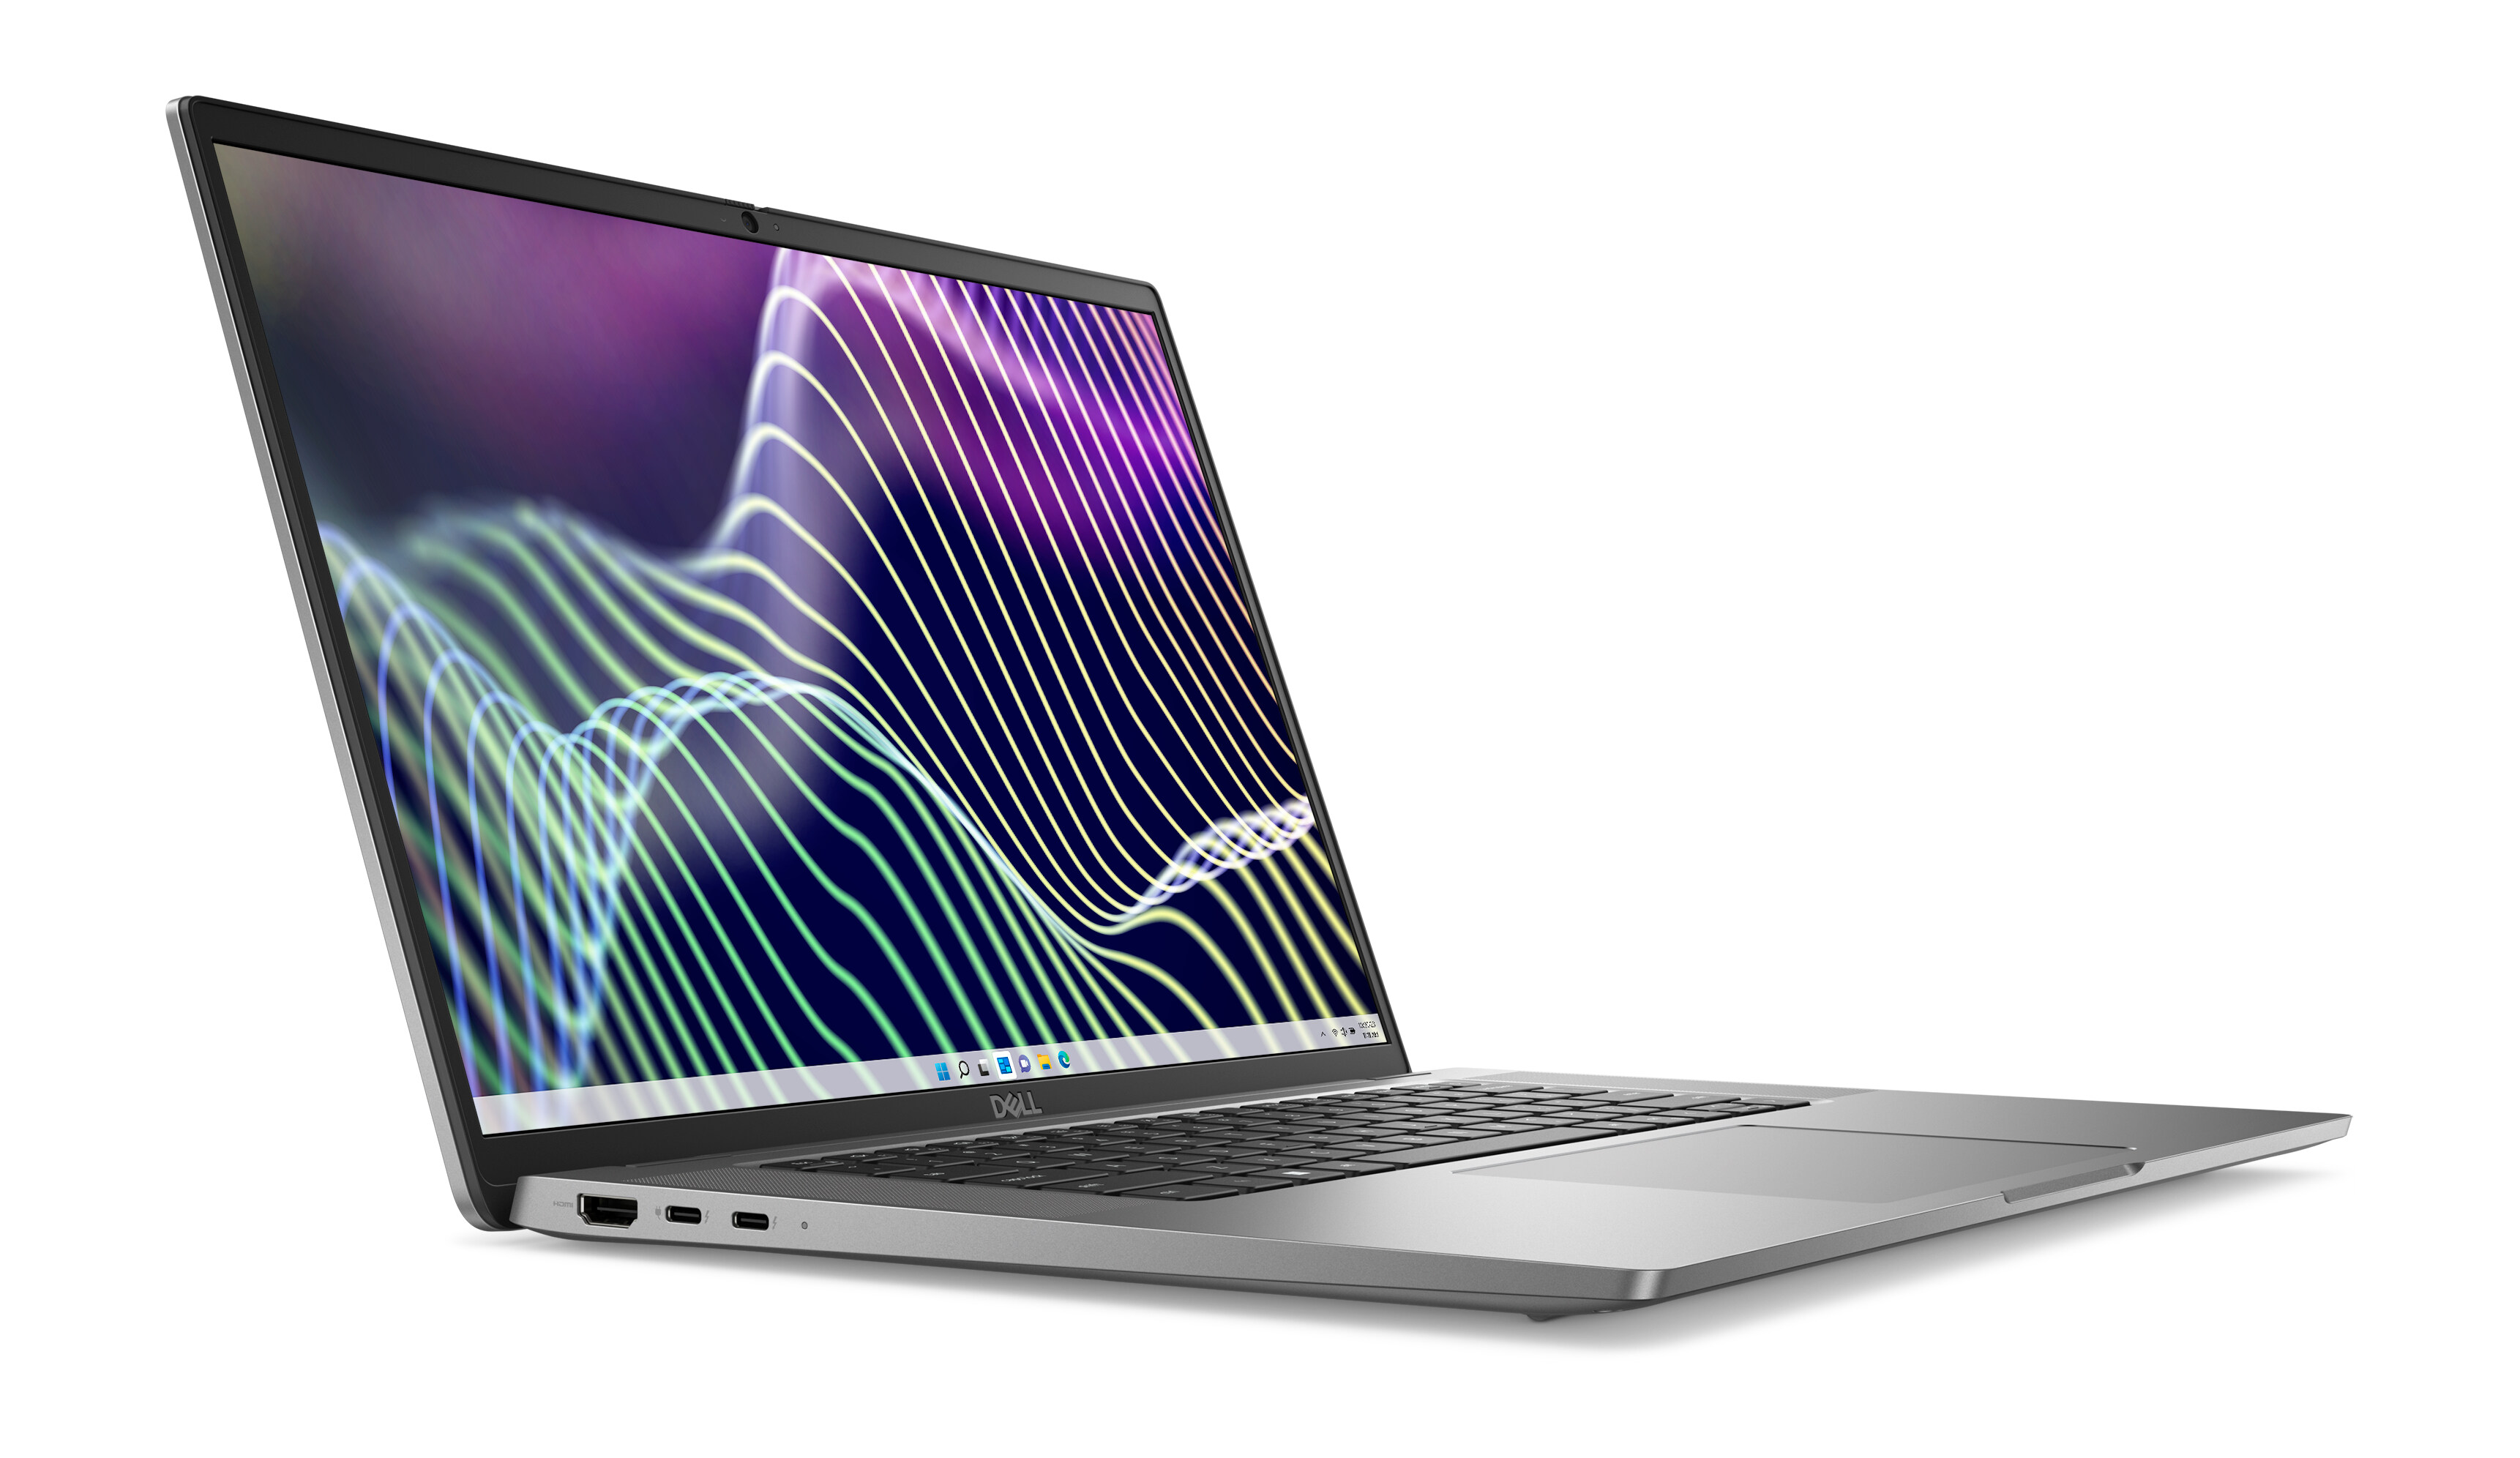 https://i.dell.com/is/image/DellContent/content/dam/ss2/product-images/dell-client-products/notebooks/latitude-notebooks/latitude-16-7640-laptop/media-gallery/laptop-latitude-16-7640-gray-wlan-nonfpr-gallery-1.psd?fmt=pjpg&pscan=auto&scl=1&wid=3443&hei=1992&qlt=100,1&resMode=sharp2&size=3443,1992&chrss=full&imwidth=5000